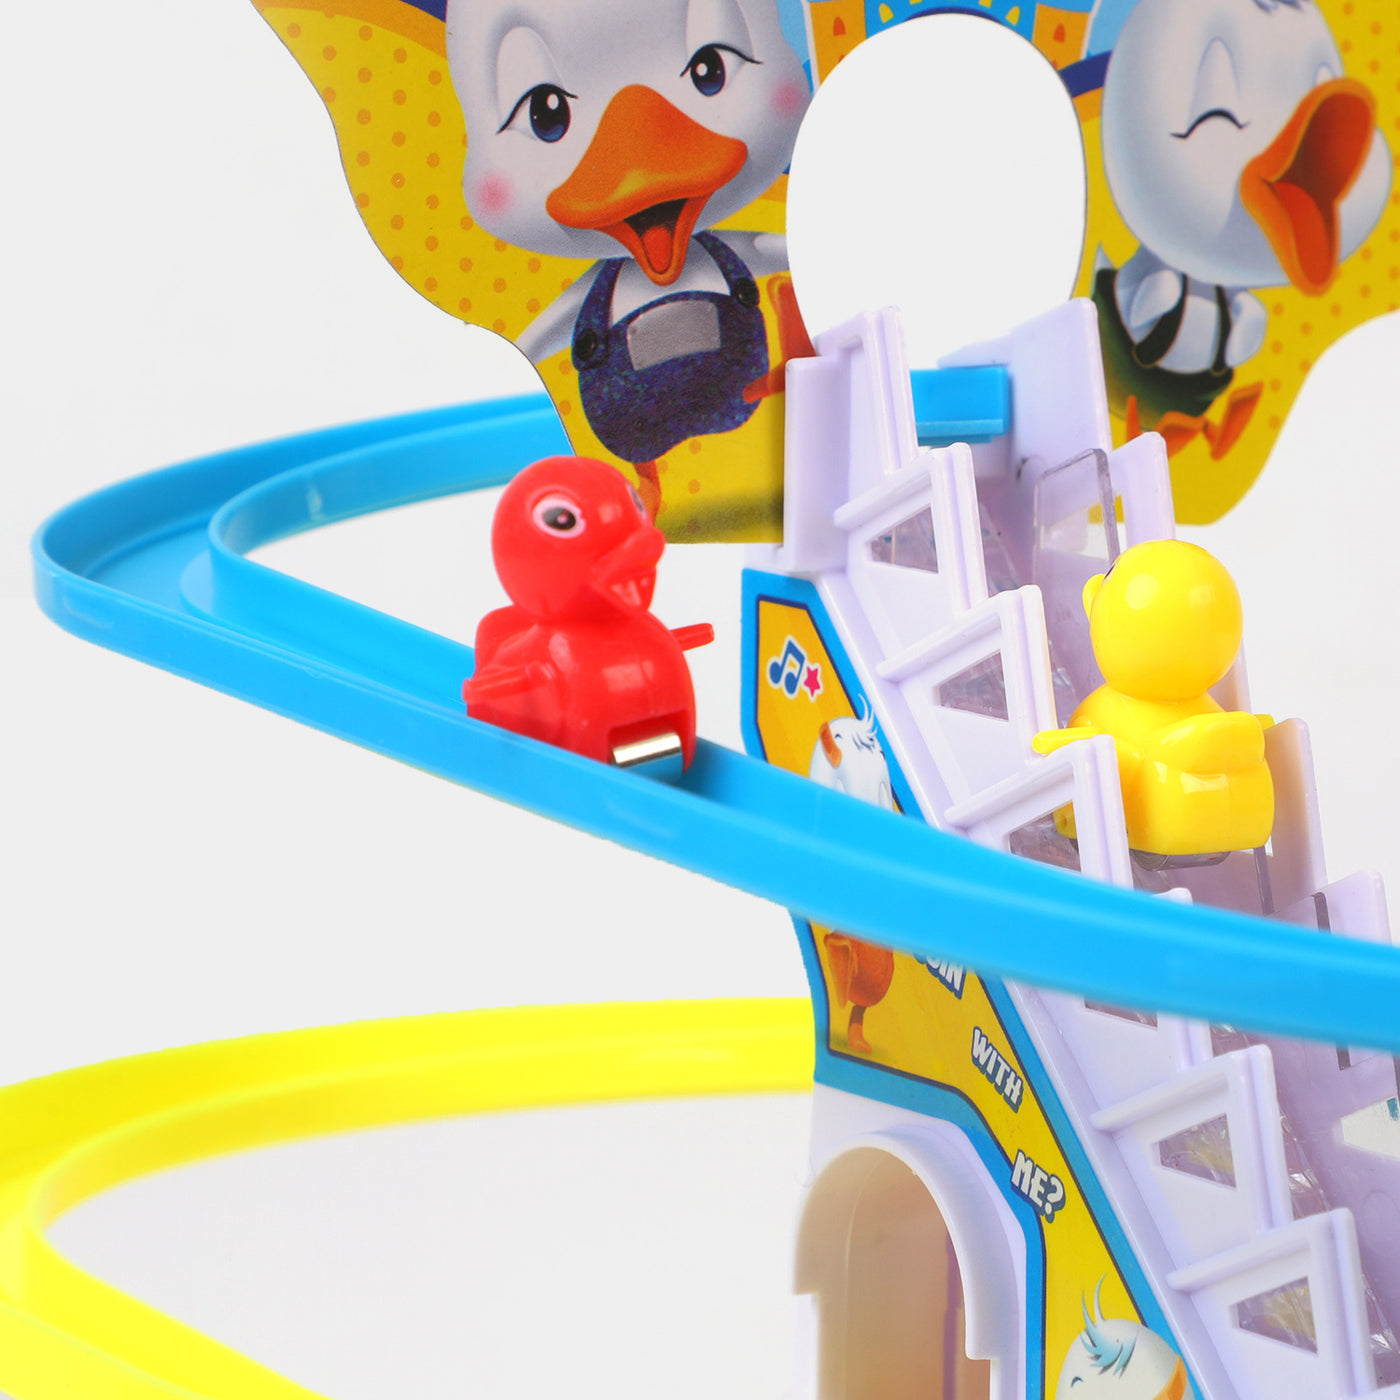 Electronic Music Funny Climbing Stairs Runway Cartoon Toy Set